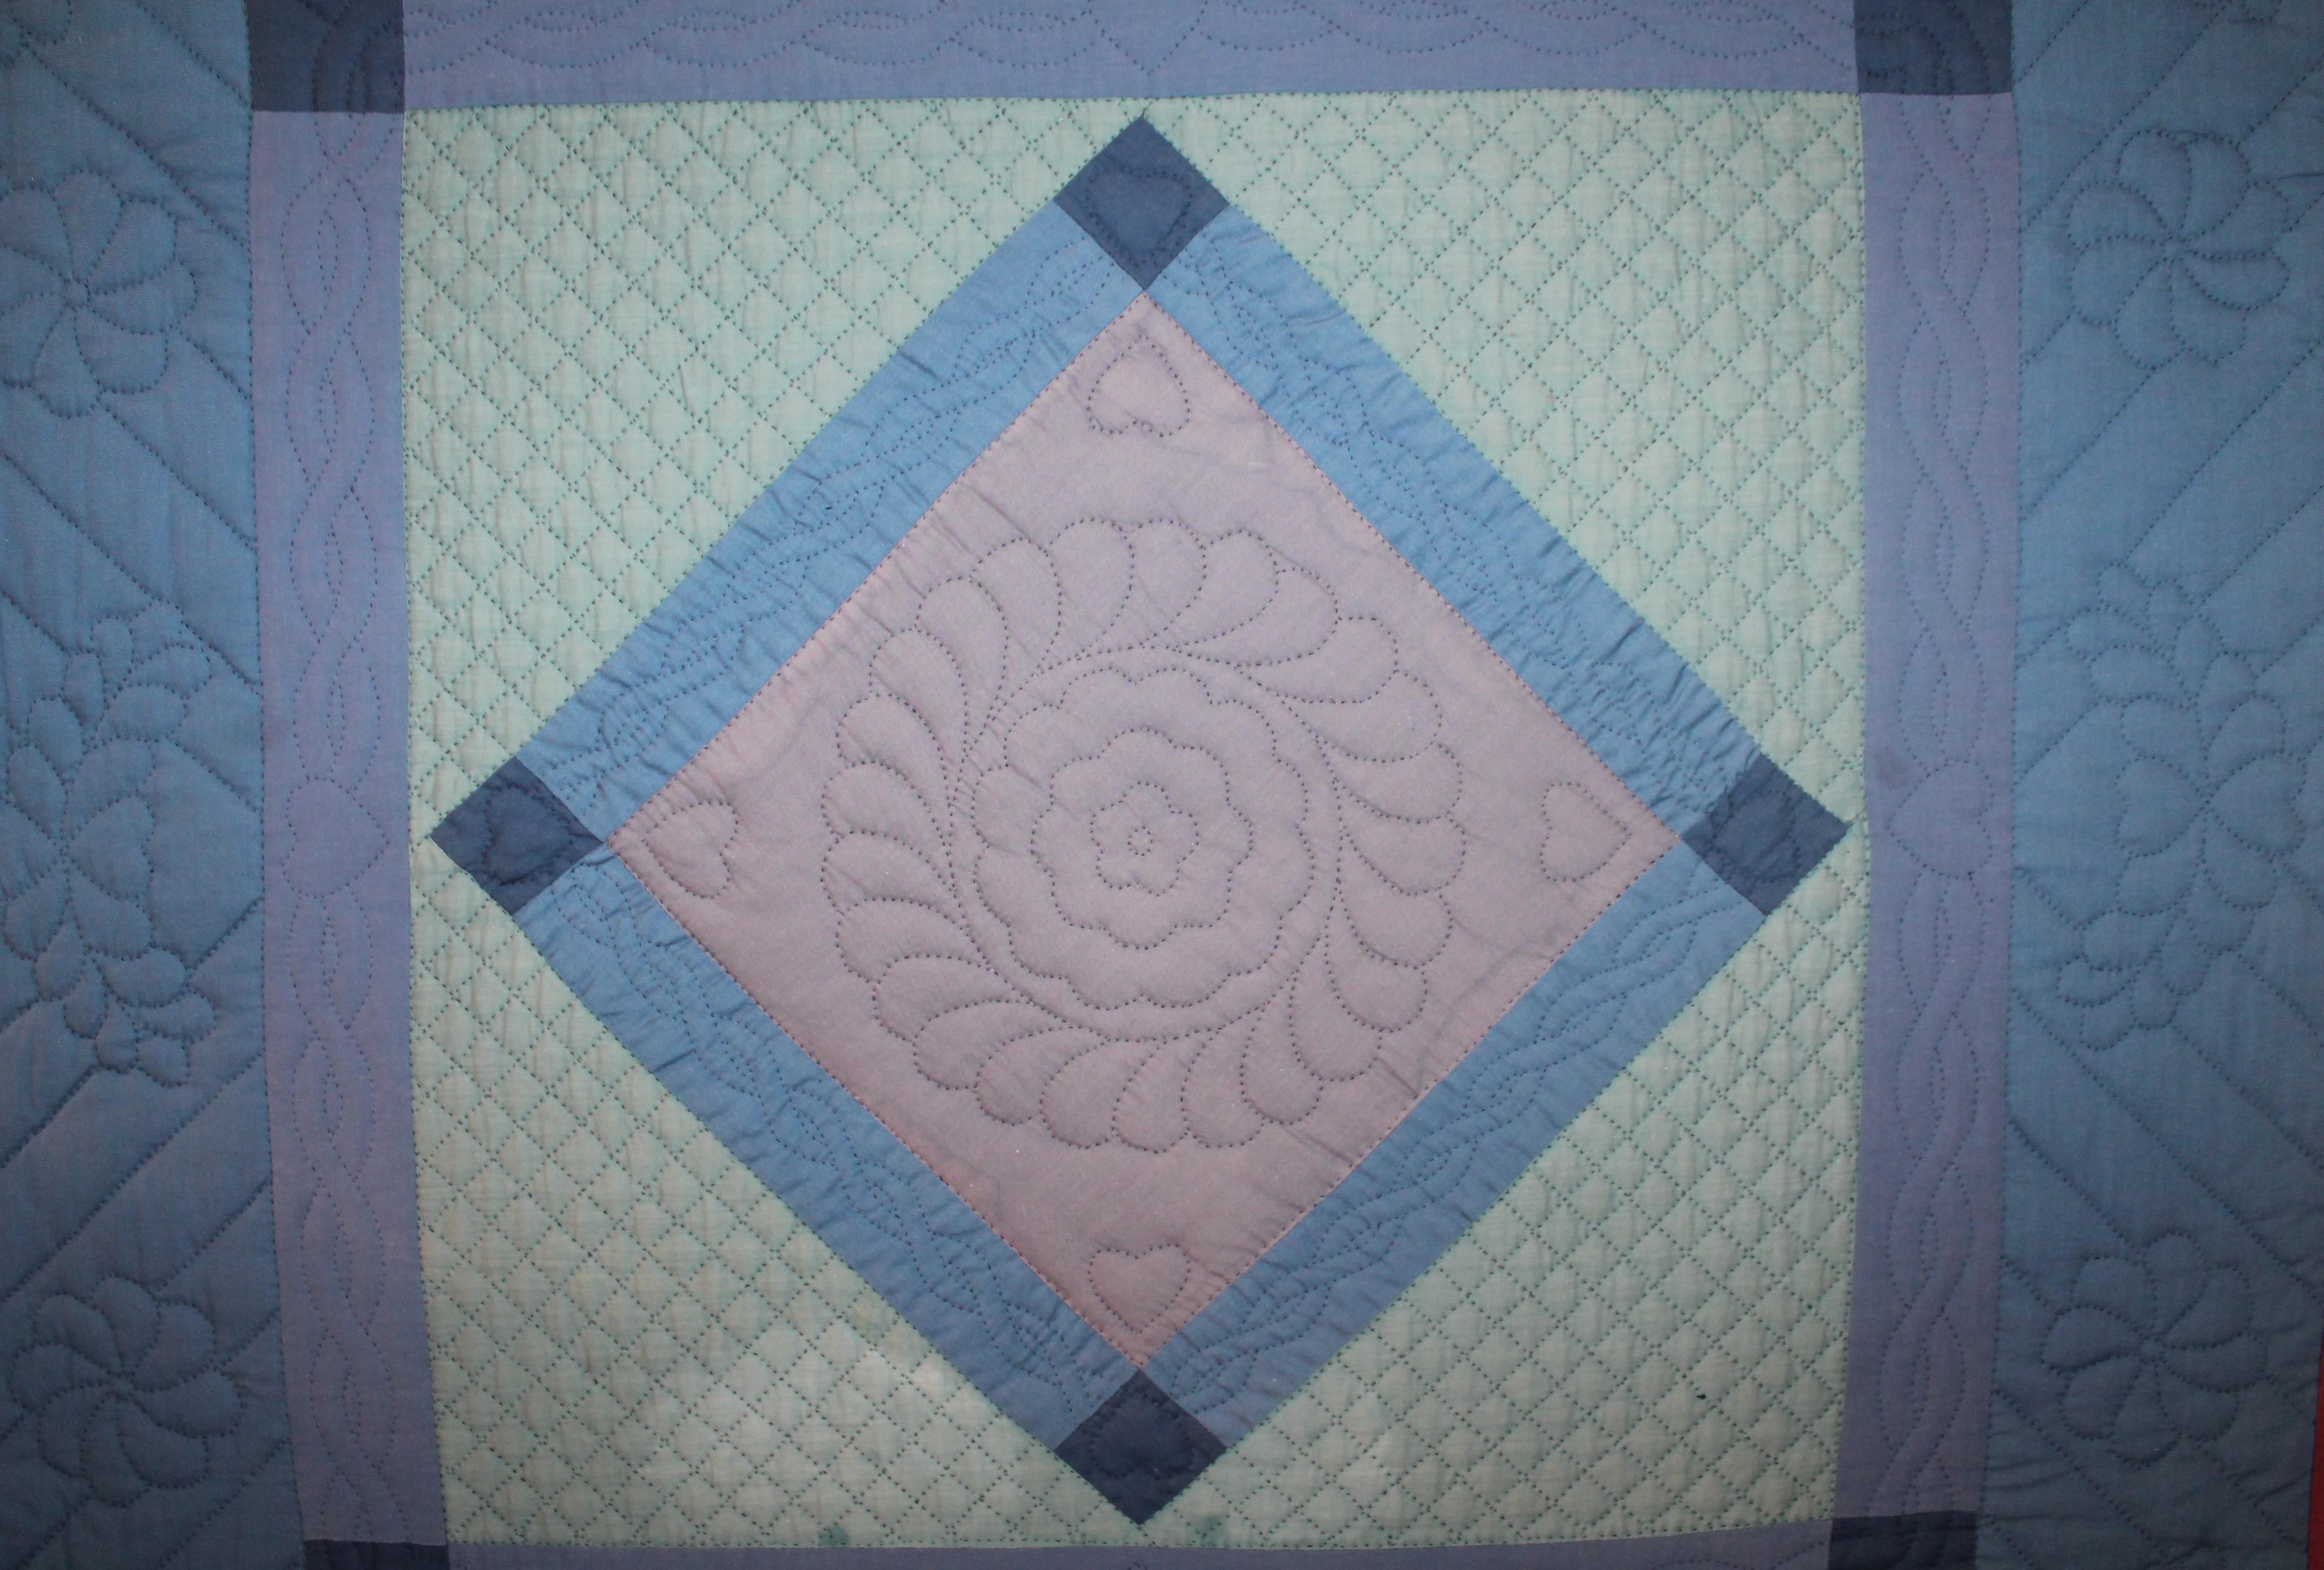 Amish mounted diamond in a square crib quilt from Lancaster County, Pennsylvania. This rare and very unusual all cotton crib quilt is in very good condition with slight lighted colors.